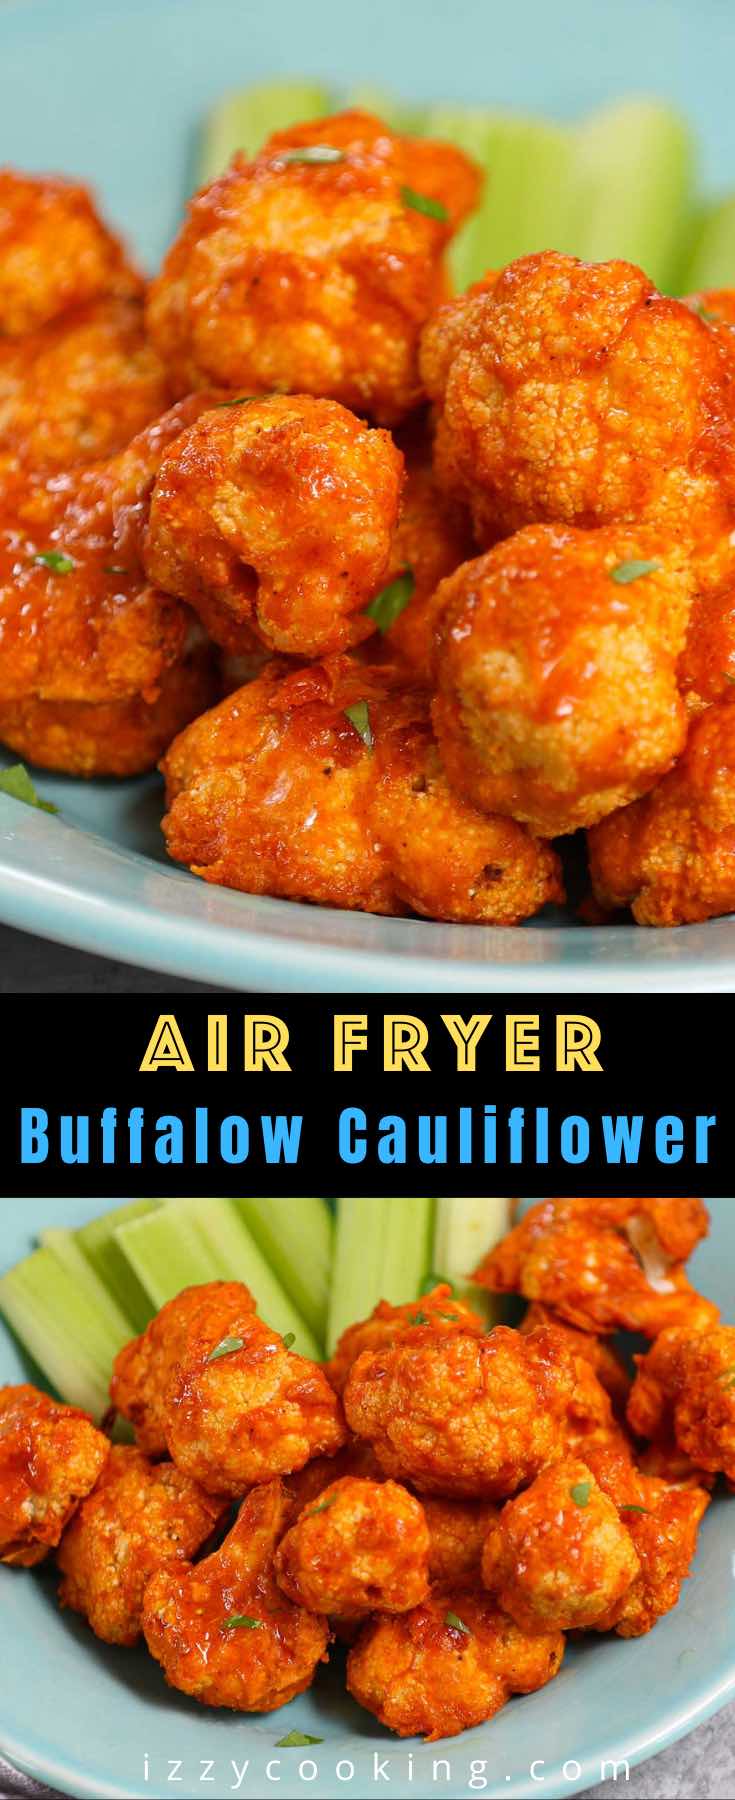 Air Fryer Buffalo Cauliflower is a healthy and low-carb appetizer, snack, or side dish made with NO OIL! These spicy vegan cauliflower bites don’t taste like Buffalo wings, but they’re definitely healthier with an even better flavor. This is a really easy recipe and takes less than 20 minutes in the air fryer. 